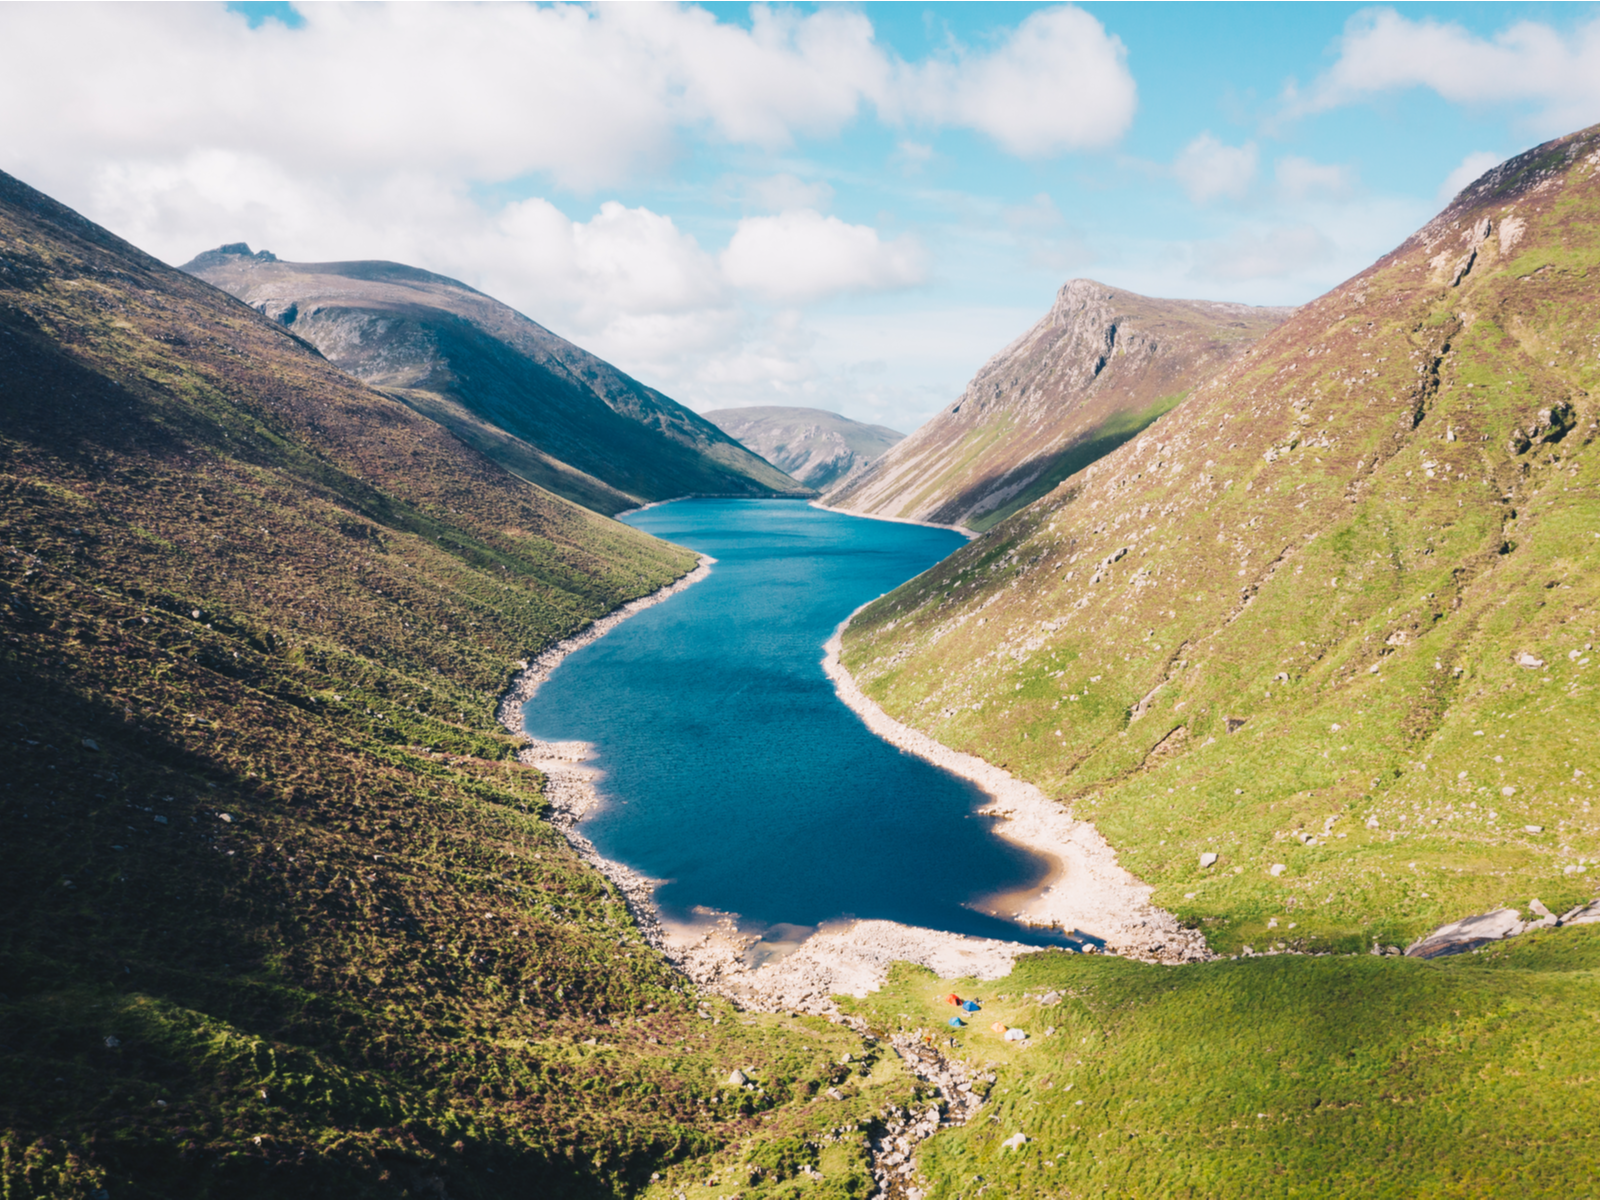 Receding water level of Silent Valley reservoir at a granite mountain range in the Mourne Mountains, one of the best places to visit in Ireland